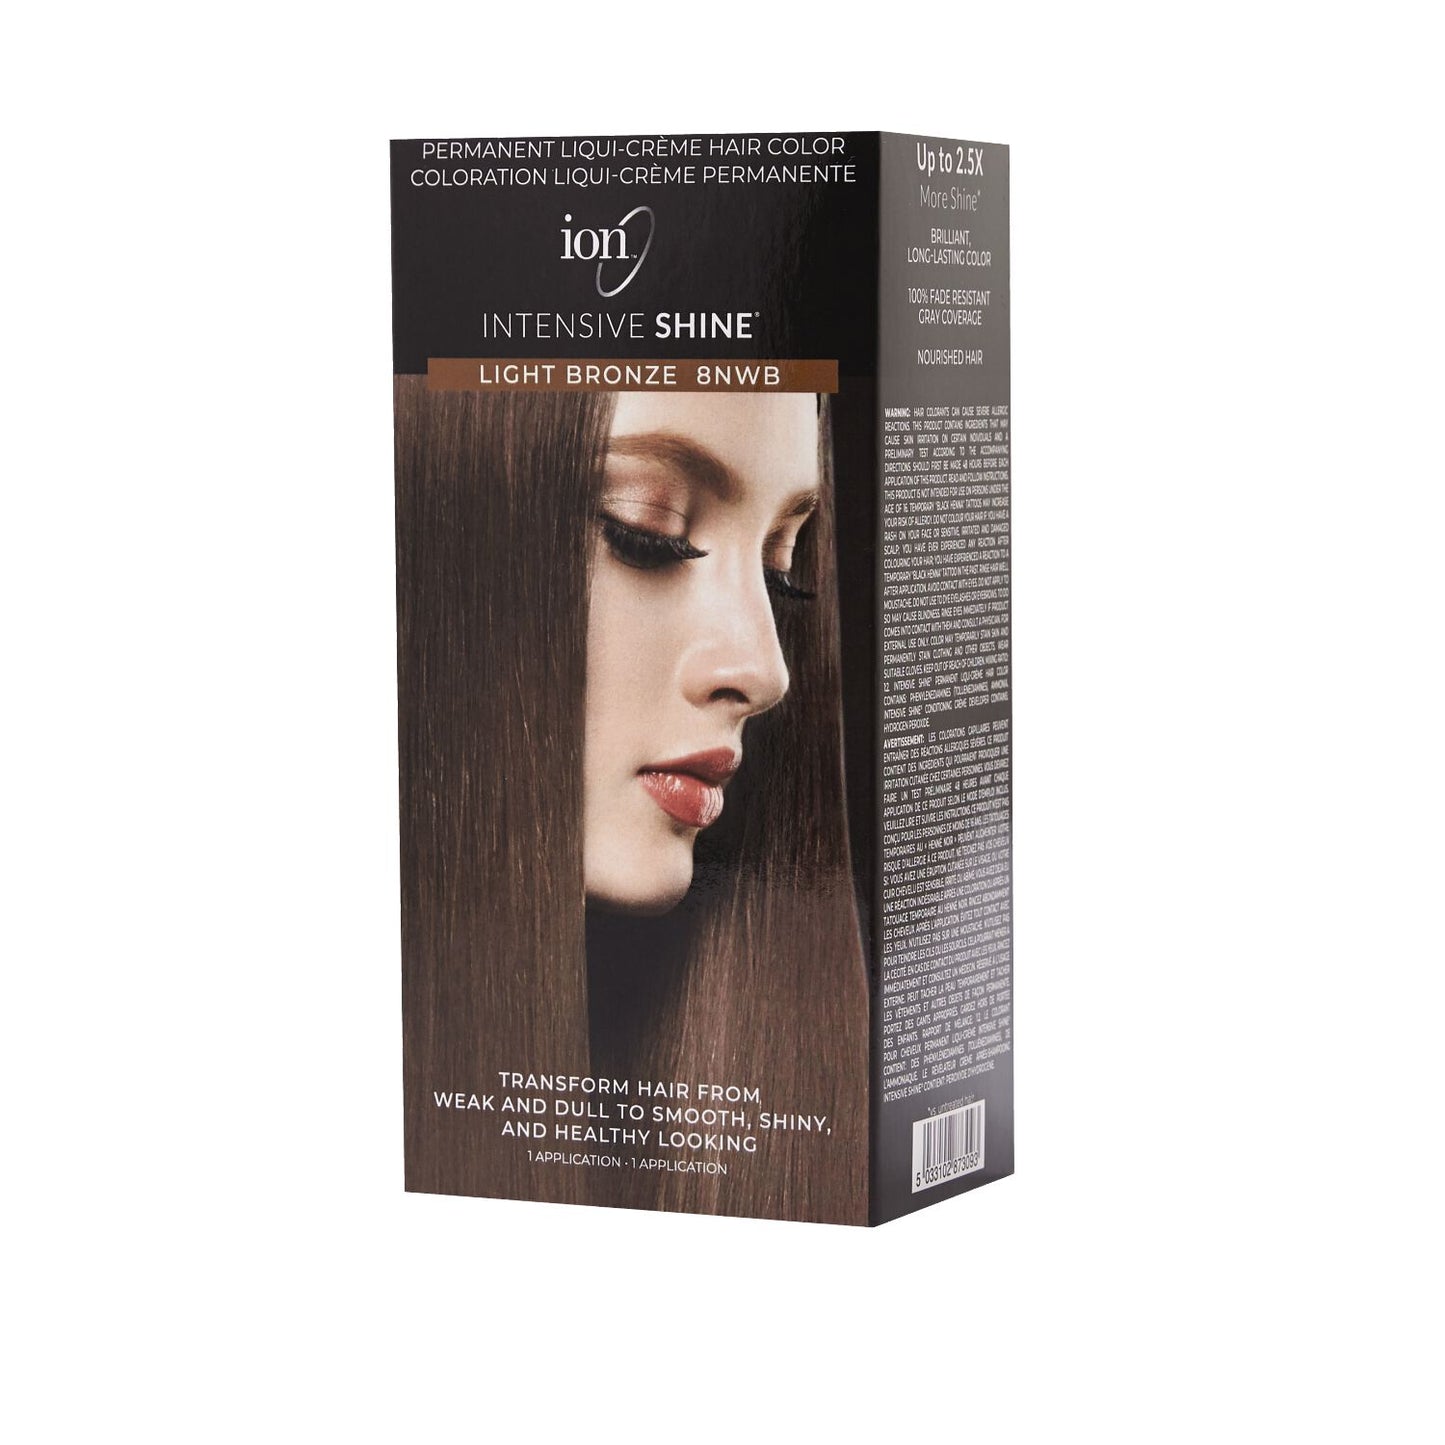 Intensive Shine  by   ion Intensive Shine Hair Color Kit Light Bronze 8NWB